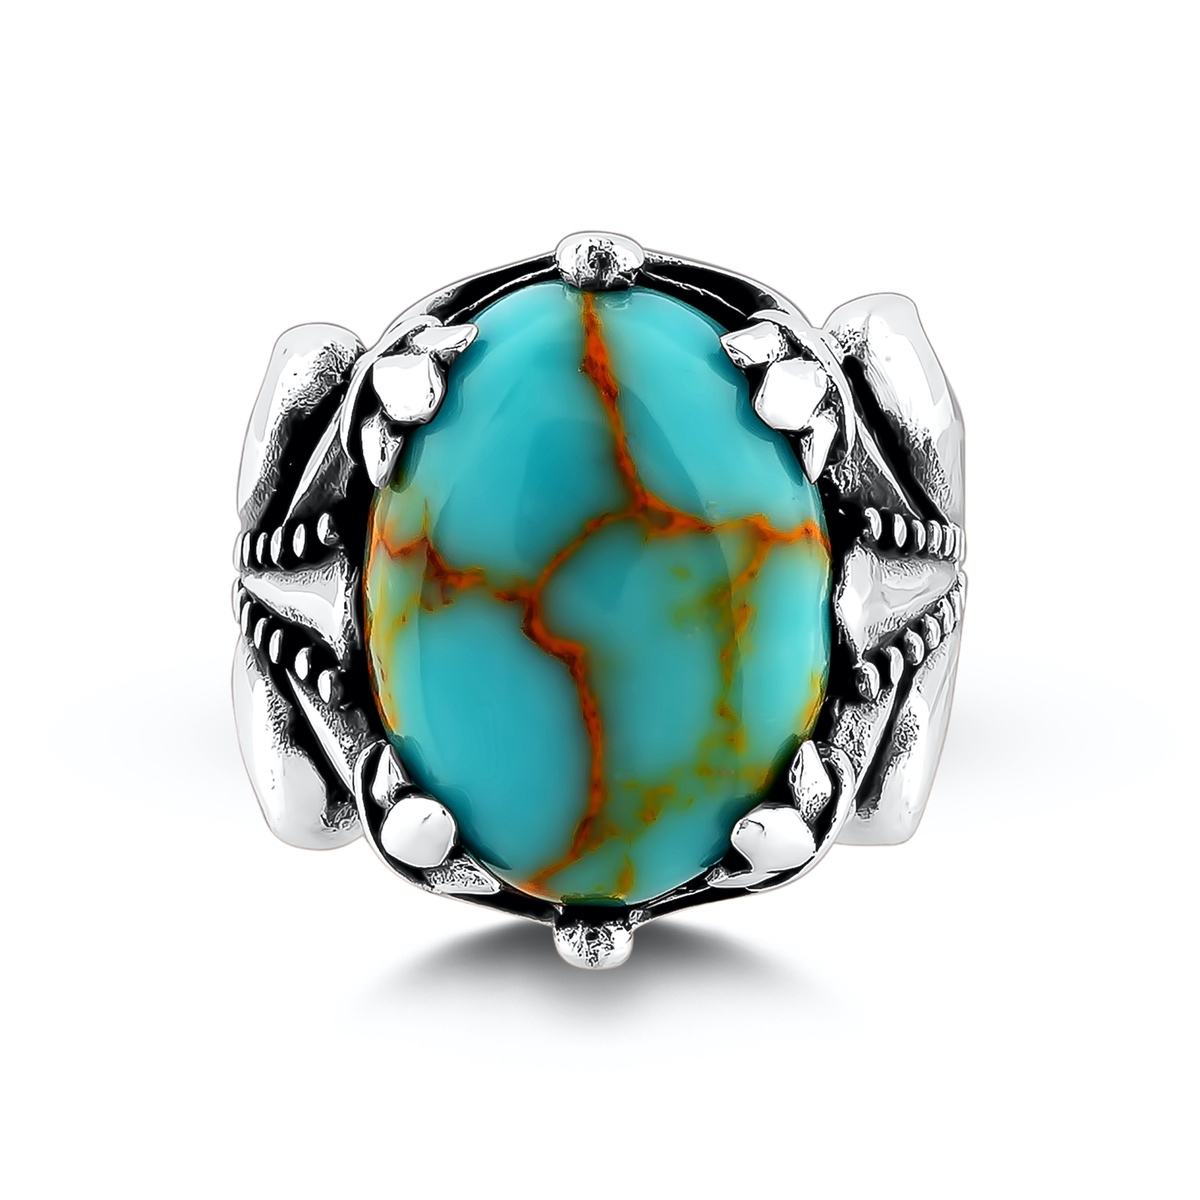 Roman Crown Turquoise Stone 925 Sterling Silver Mens Ring-55